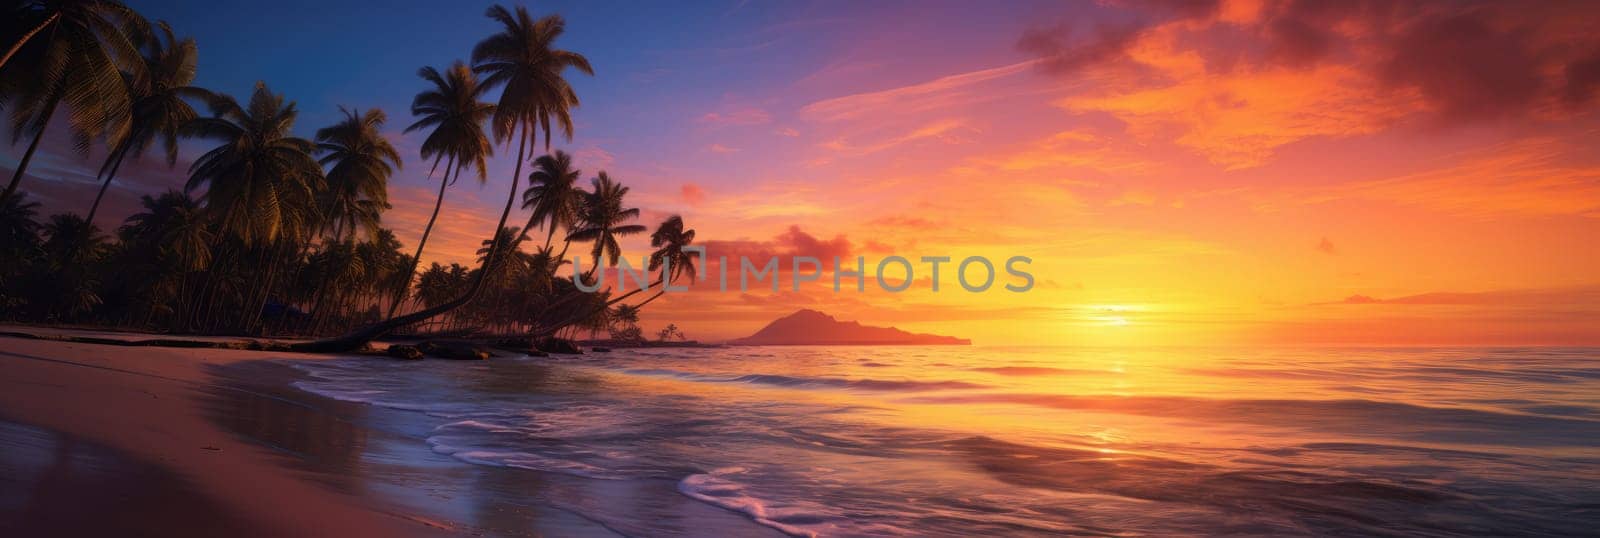 Amazing sunset on a sandy beach with palm trees in the background. by natali_brill